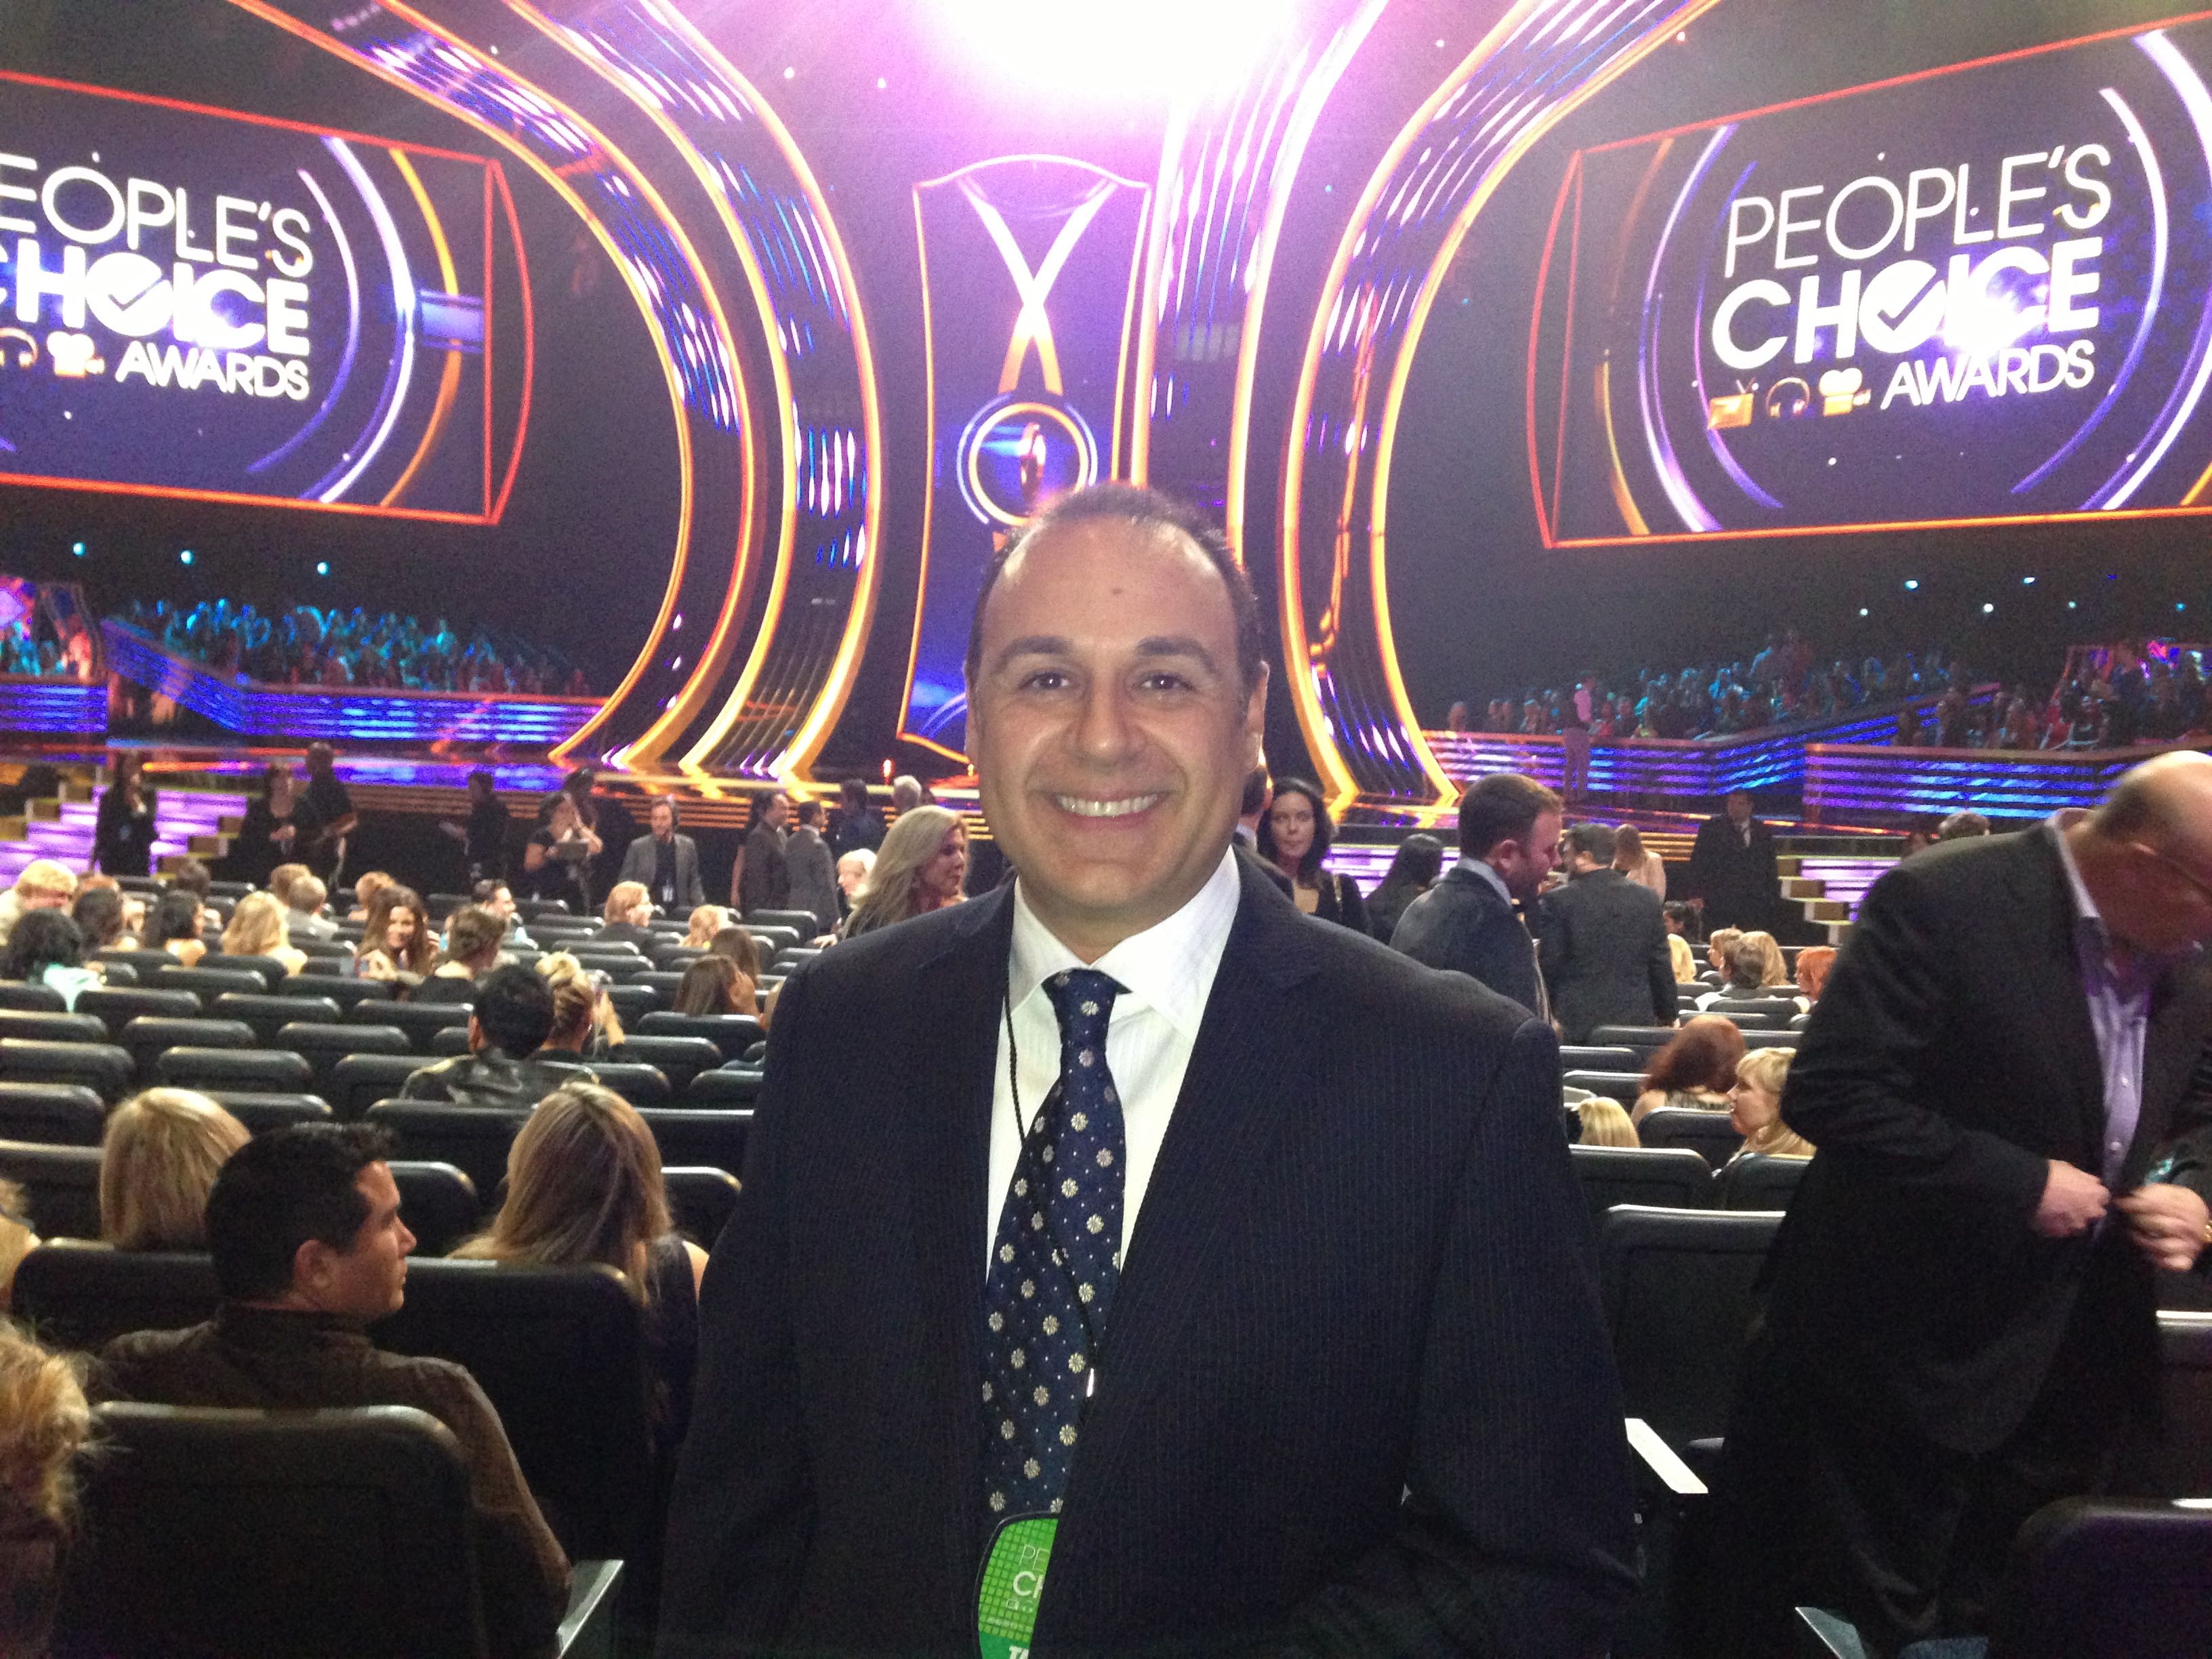 Joey Rich @ The People's Choice Awards